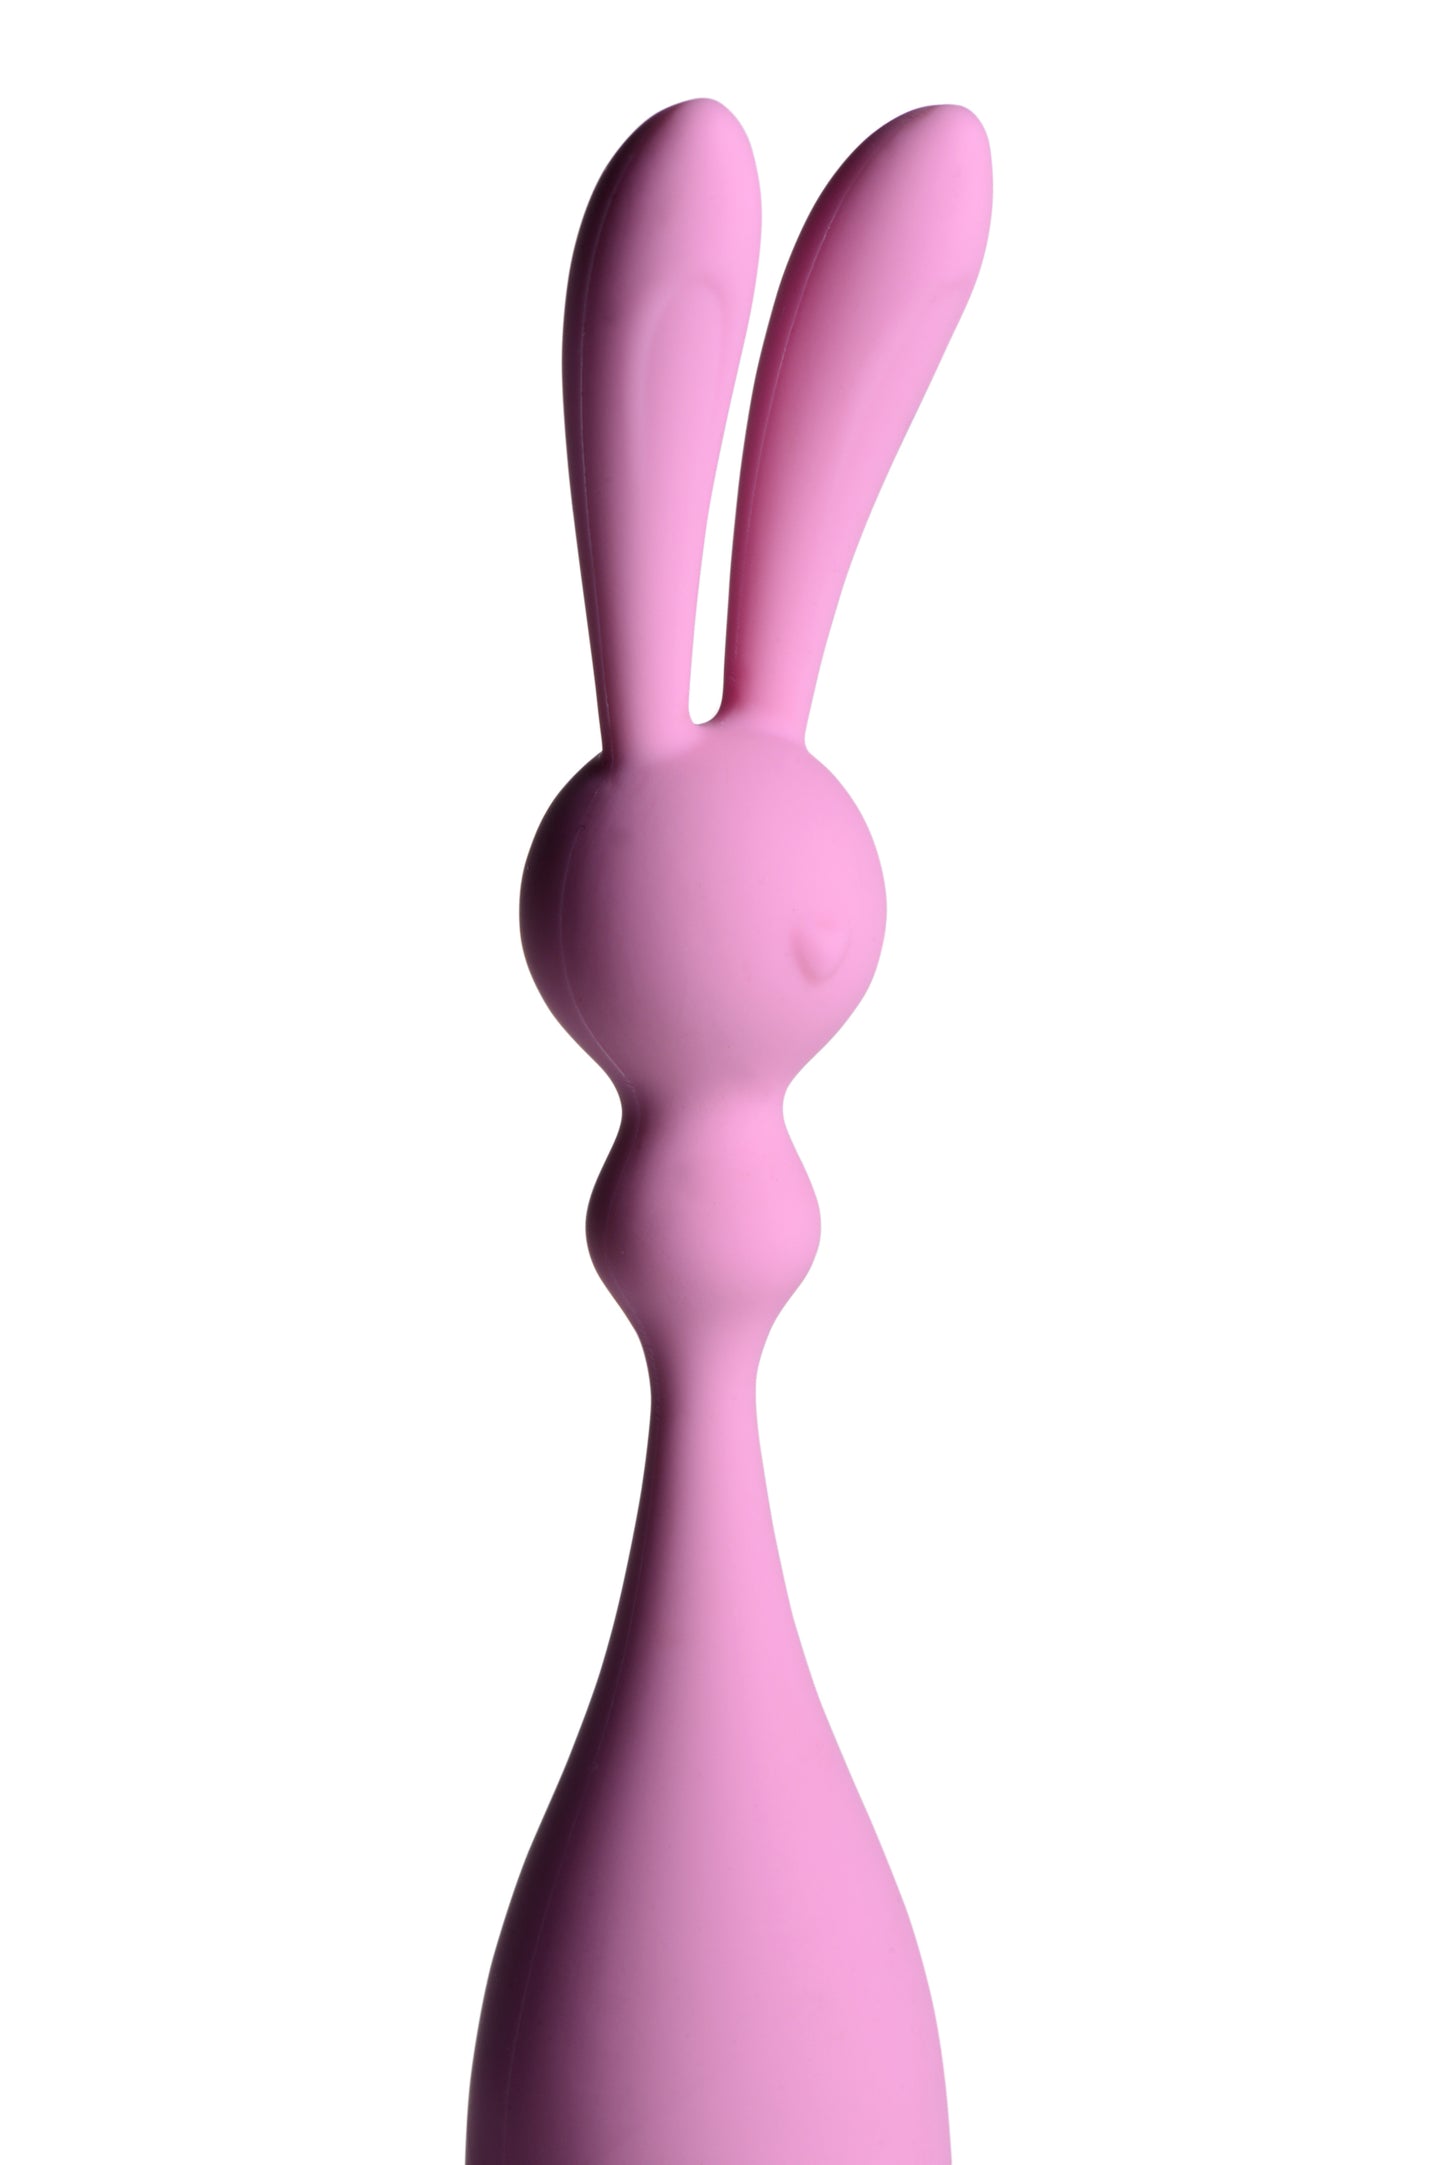 Bunny Rocket Silicone Vibrator - Just for you desires